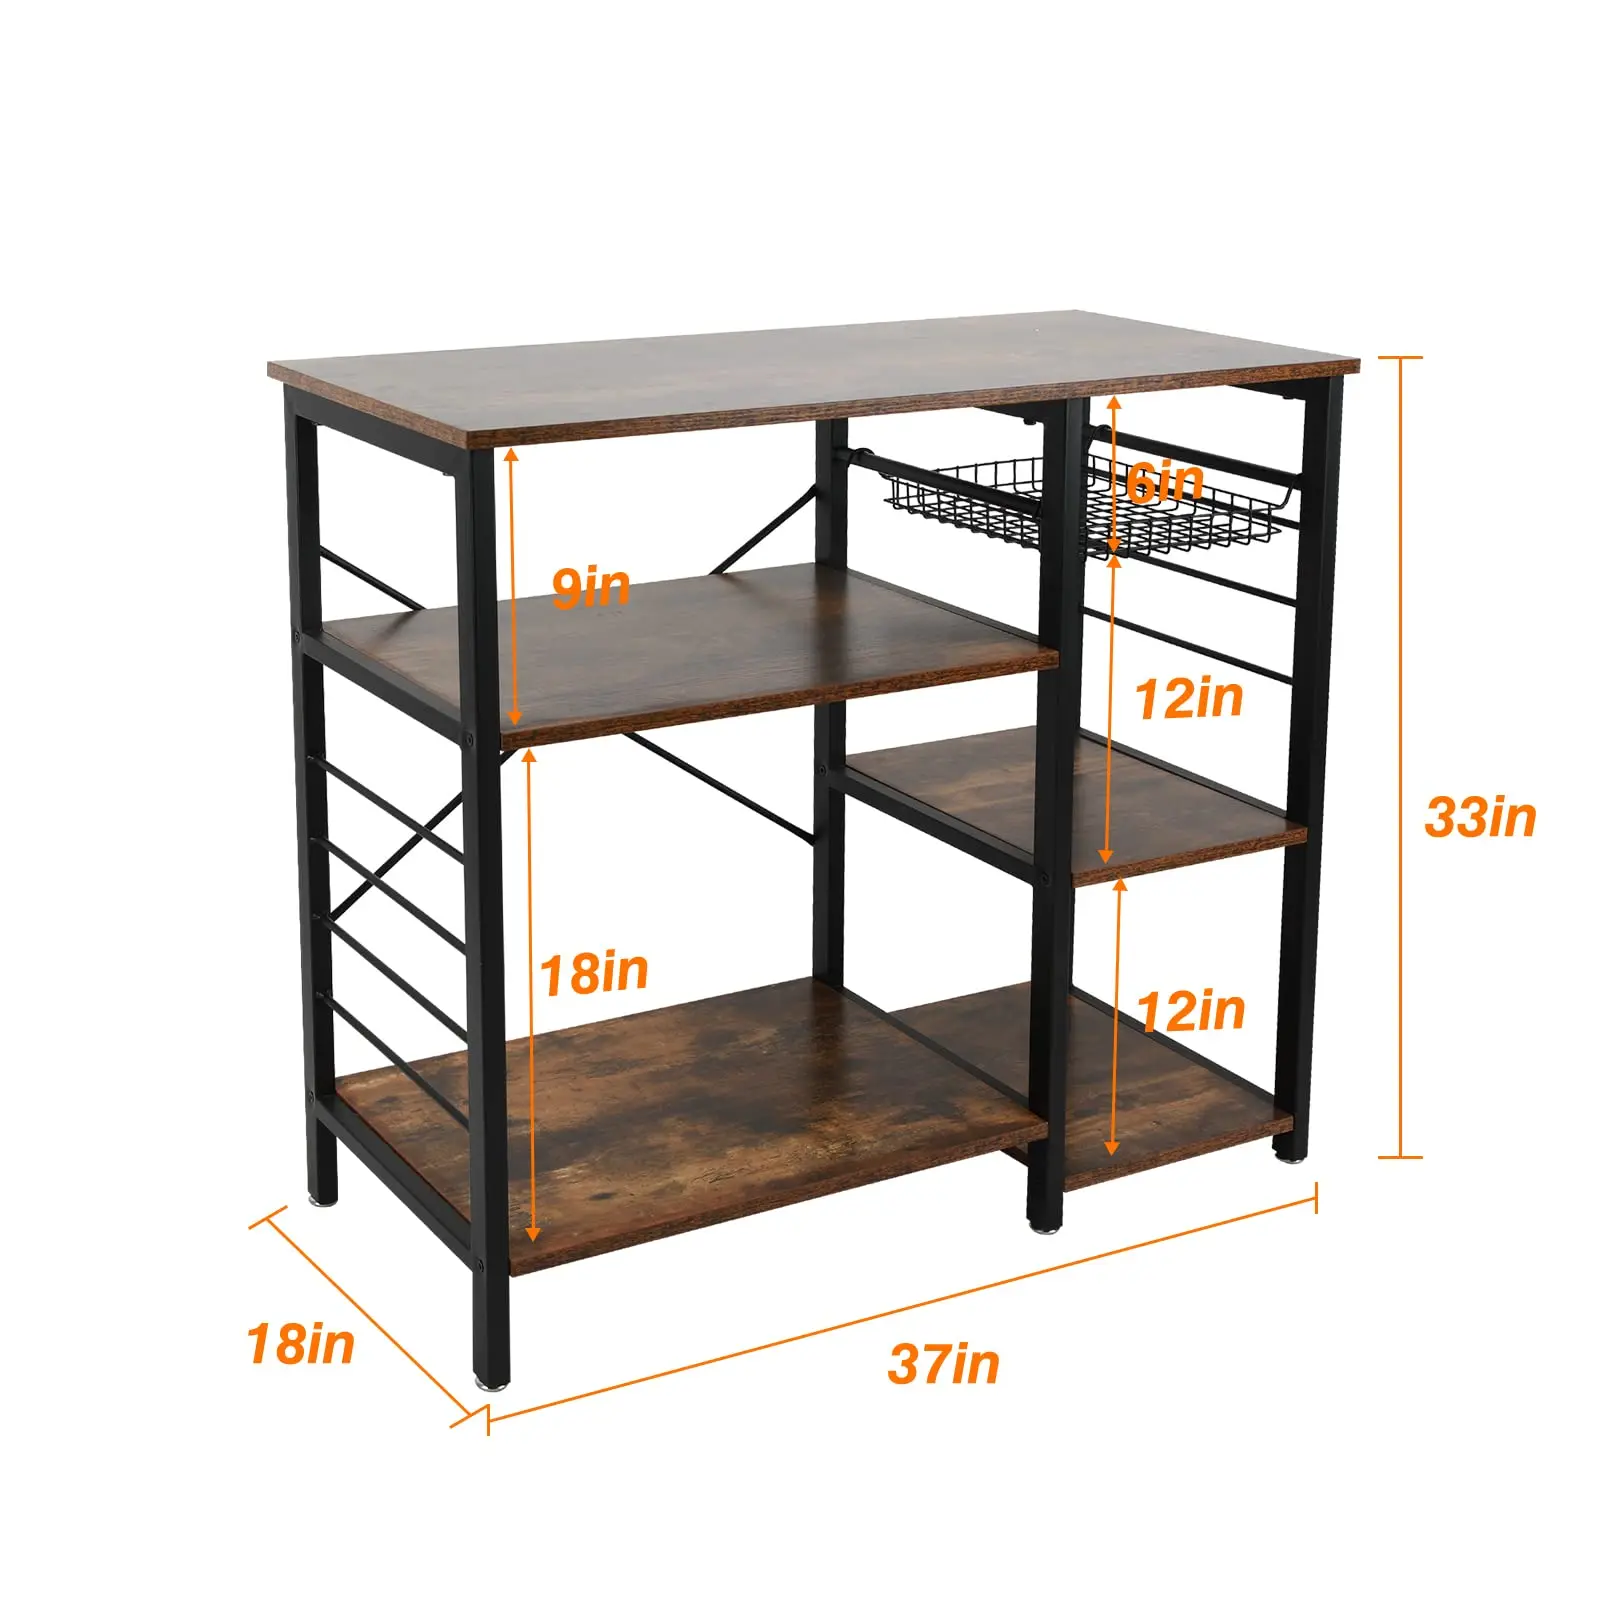 Hot Sales Kitchen Storage Home Coffee Bar Microwave Shelf Kitchen Bakers Rack Microwave Stand Bakers Storage Racks For Kitchens